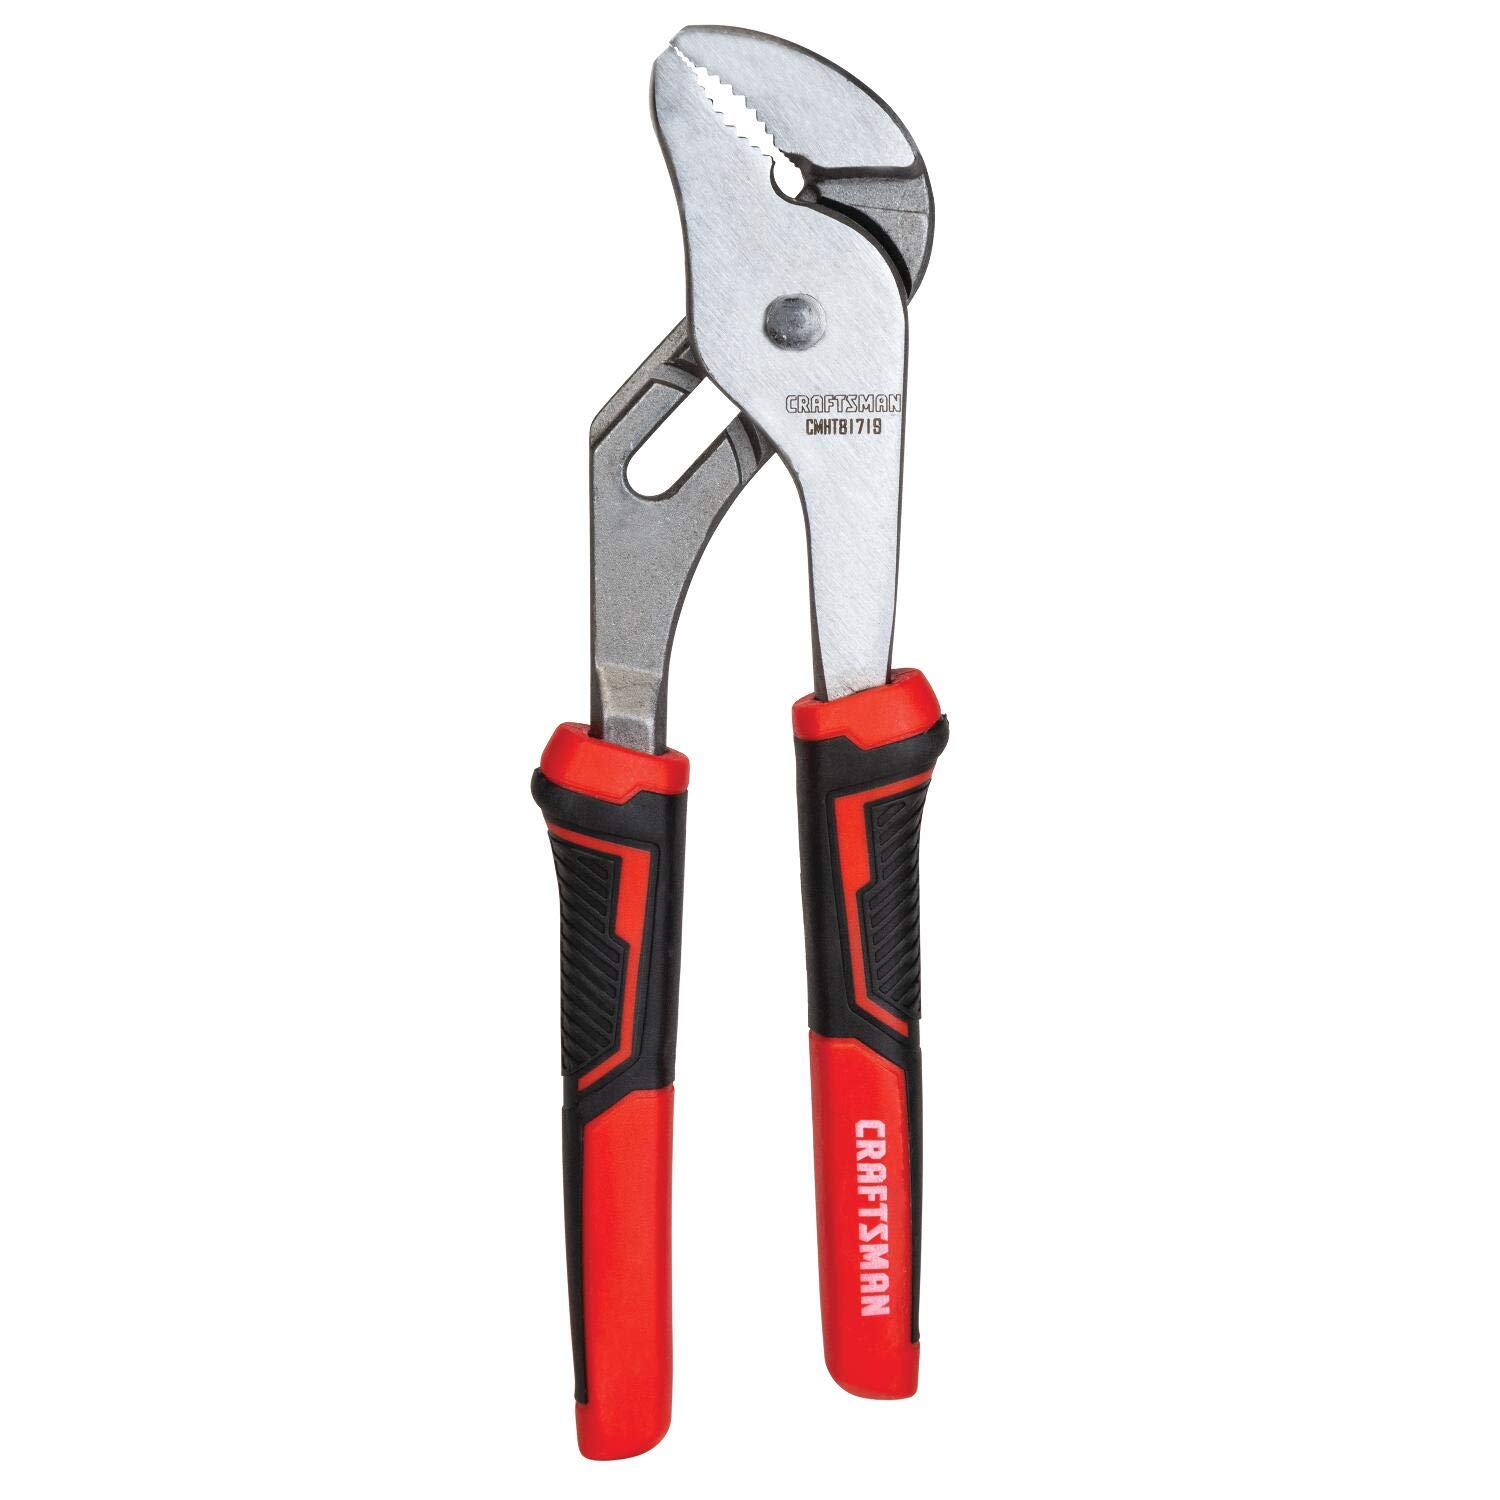 CRAFTSMAN CMHT81719 8-in. Groove Joint Pliers